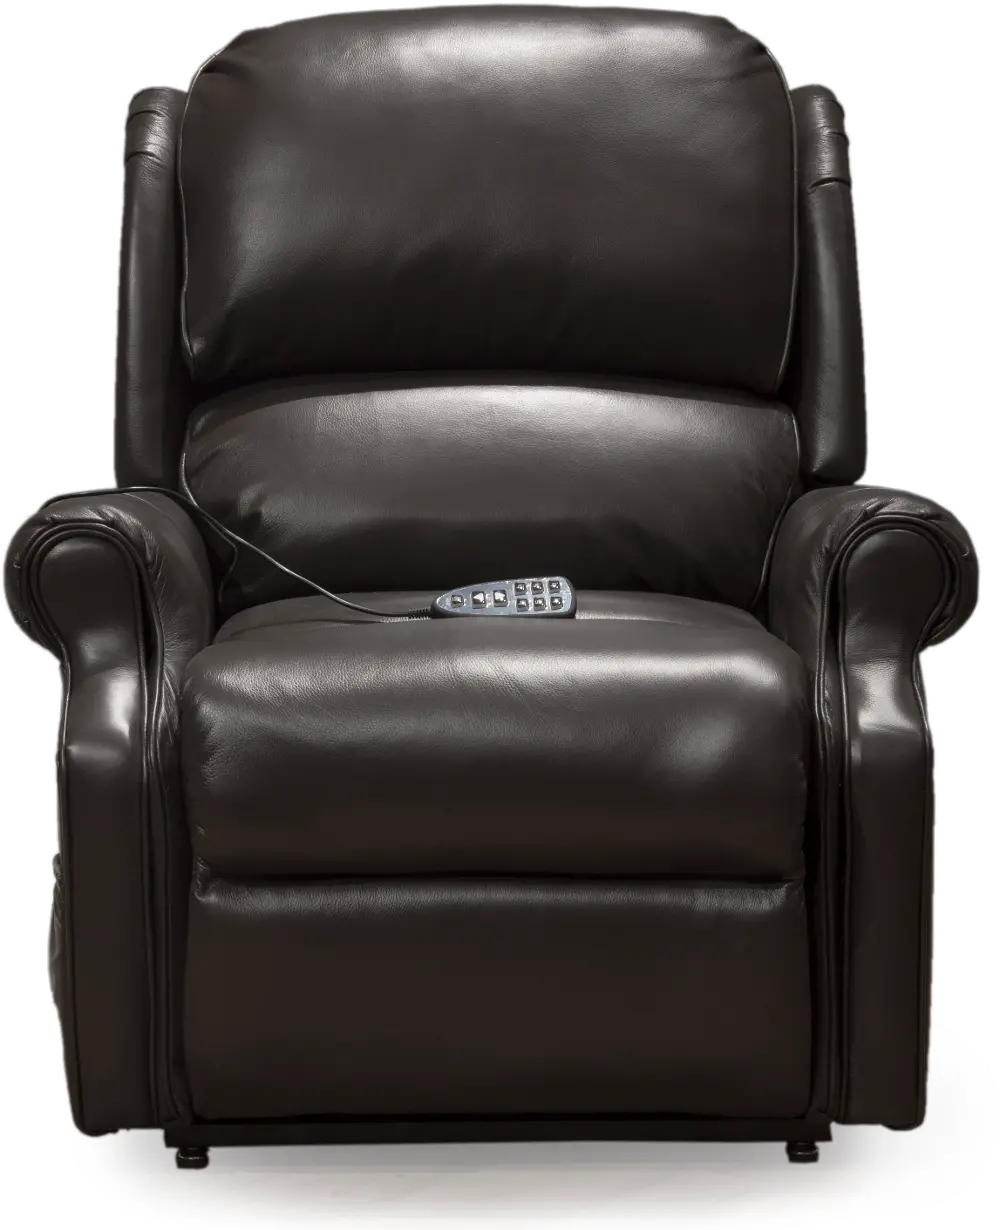 Brown Leather-Match Power Reclining Lift Chair - Palermo-1